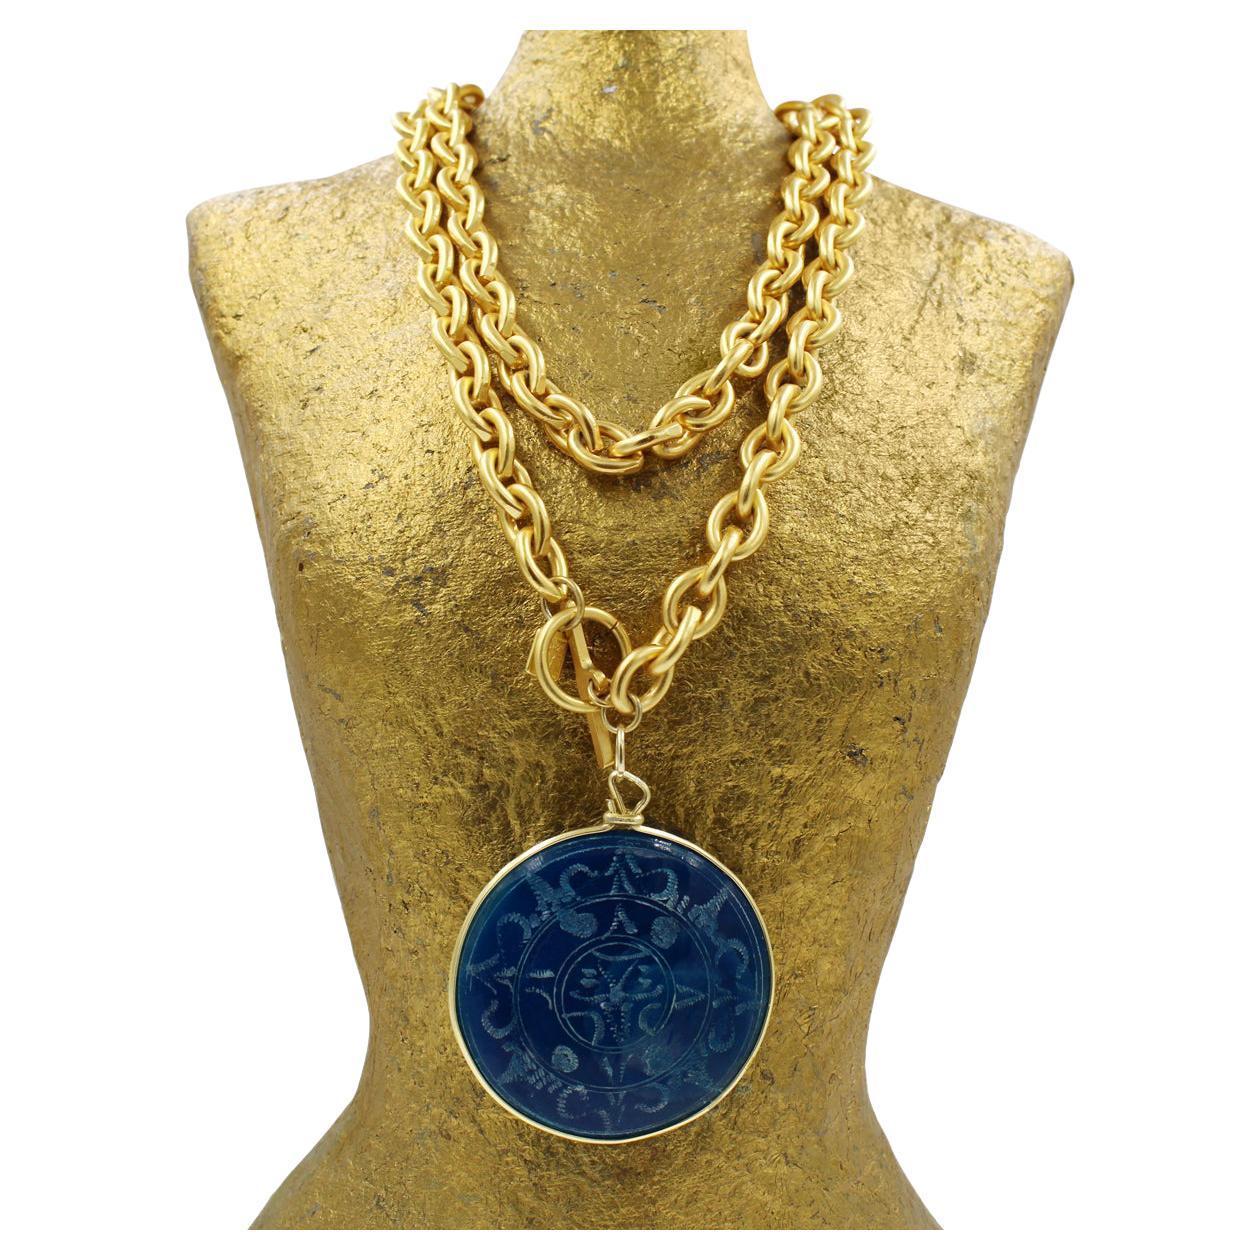 Vintage Anne Klein Toggle Necklace with Blue Disc.   Can be worn Doubled around neck as shown. This is a round heavy matte gold link toggle chain with a large round blue disc atached. The disc has a mate side and a side with some blue etchings that